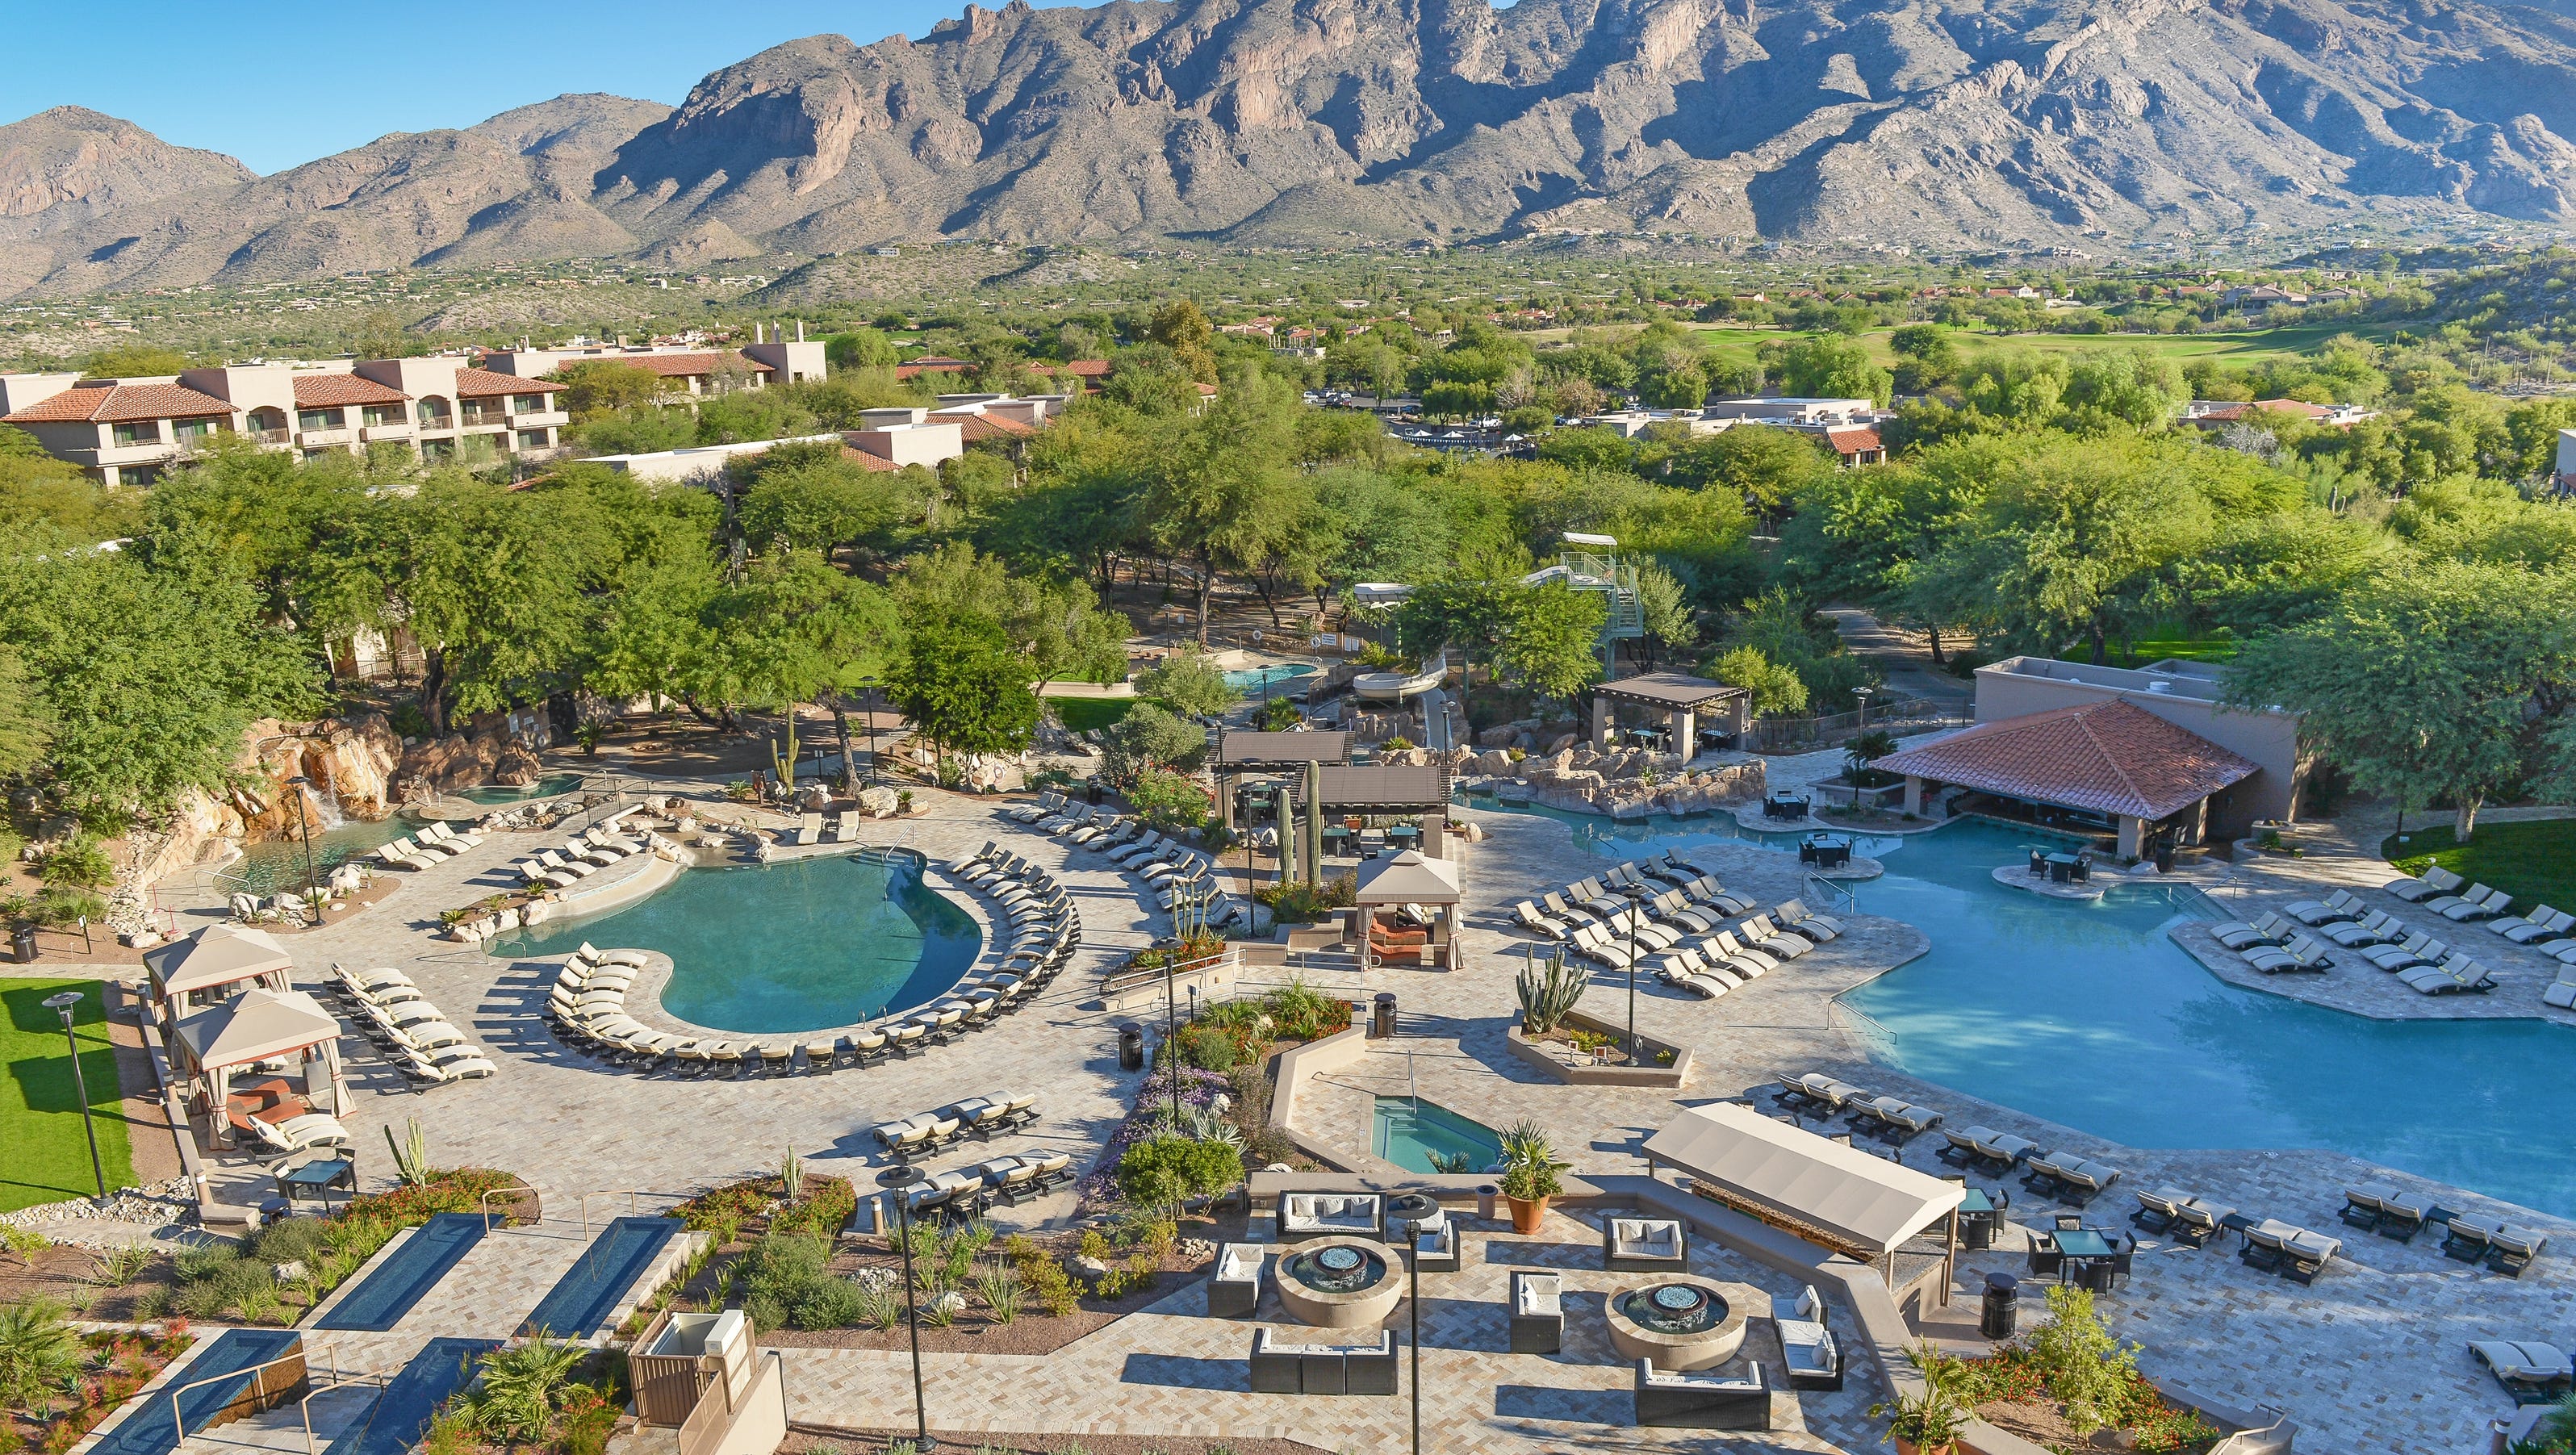 Top 10 places to stay in Tucson